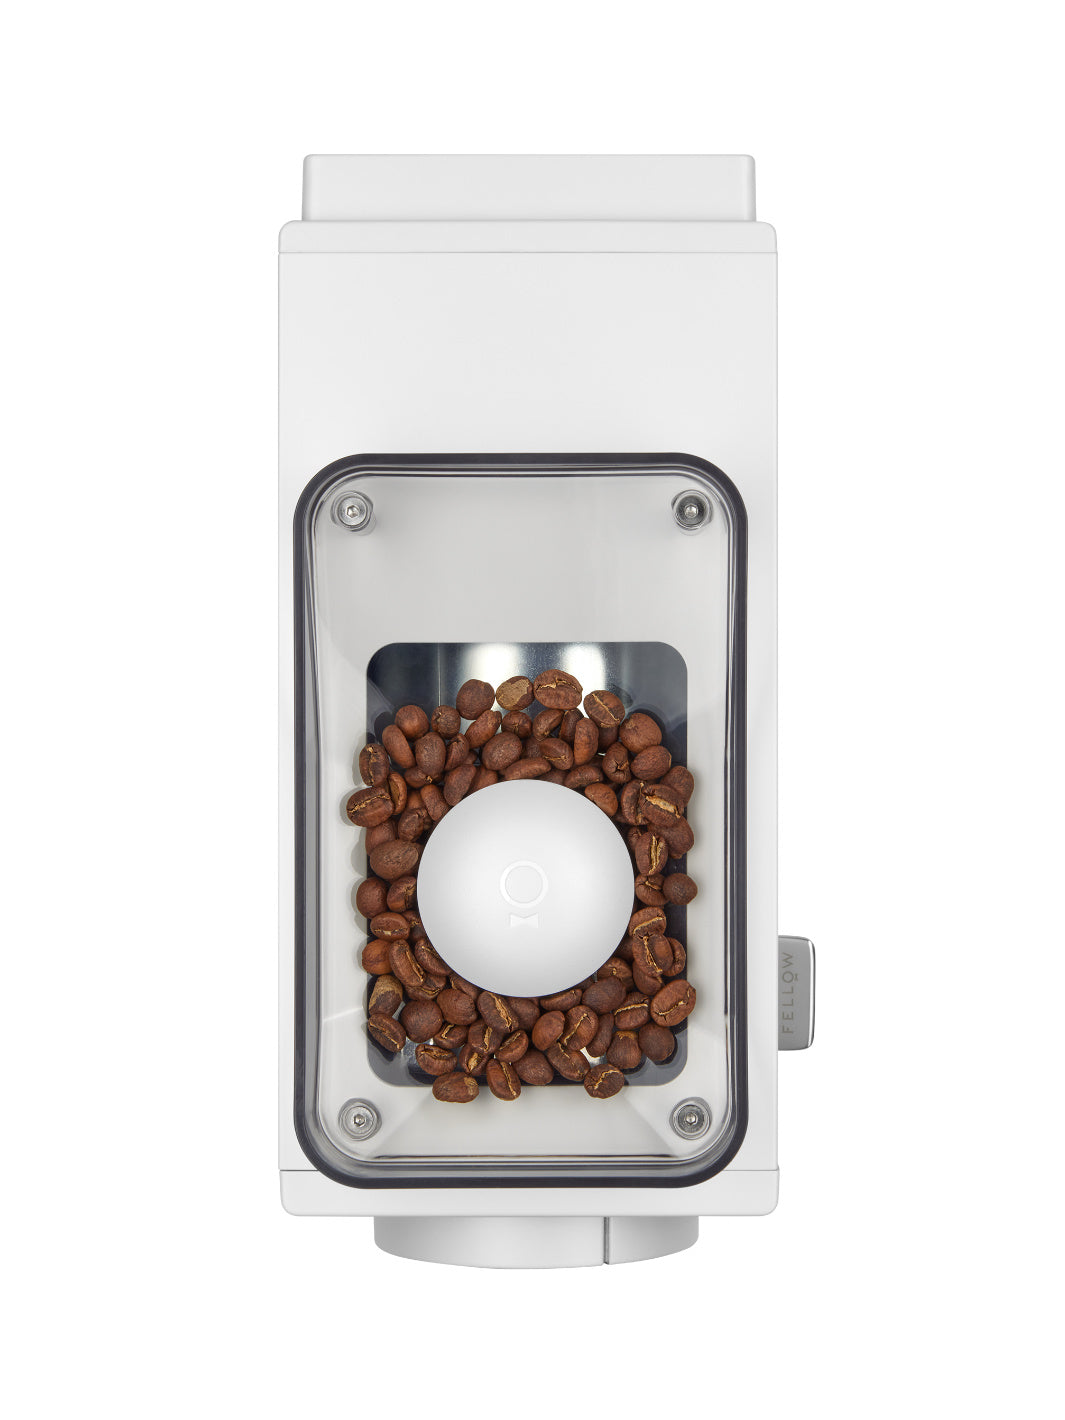 Fellow Ode Brew Grinder Gen 2 - Land and Water Coffee